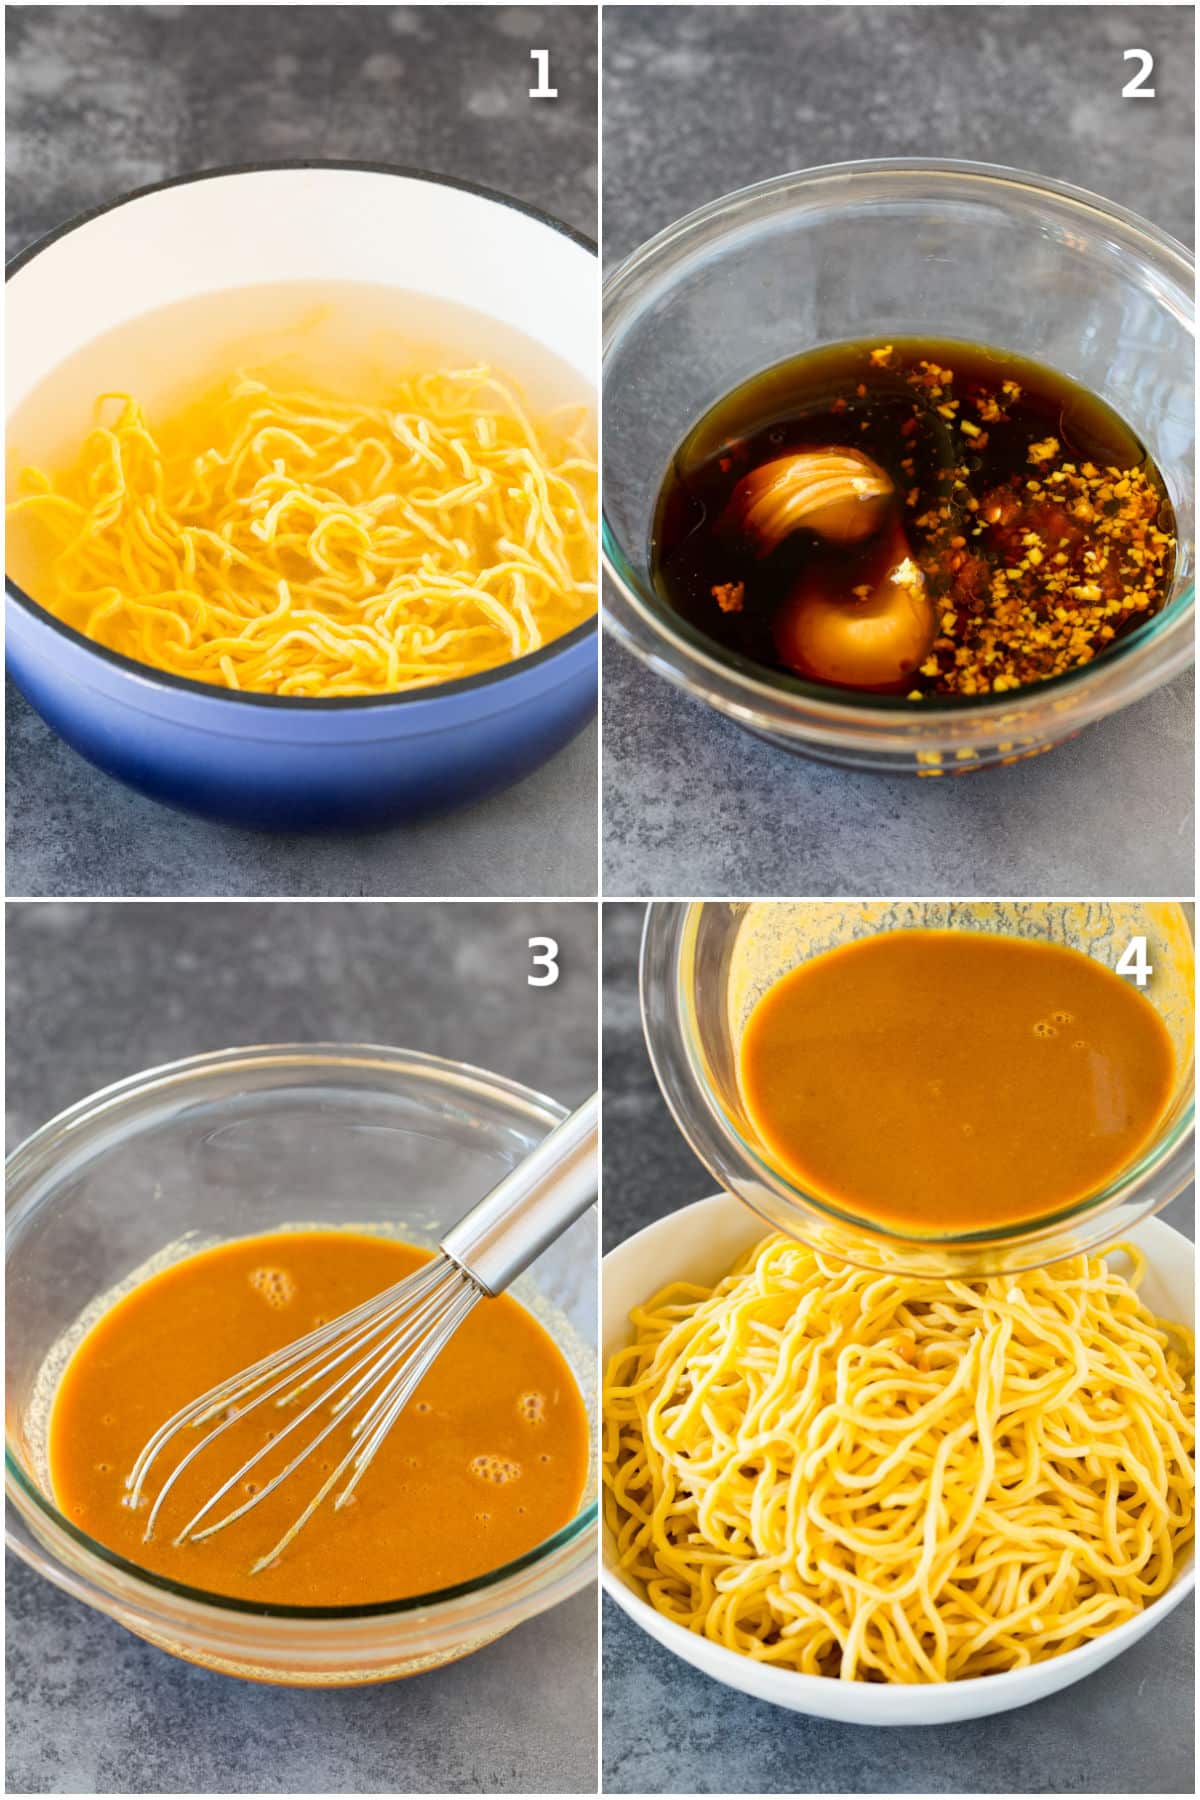 Process shots showing how to cook noodles and sesame sauce and combine the two.